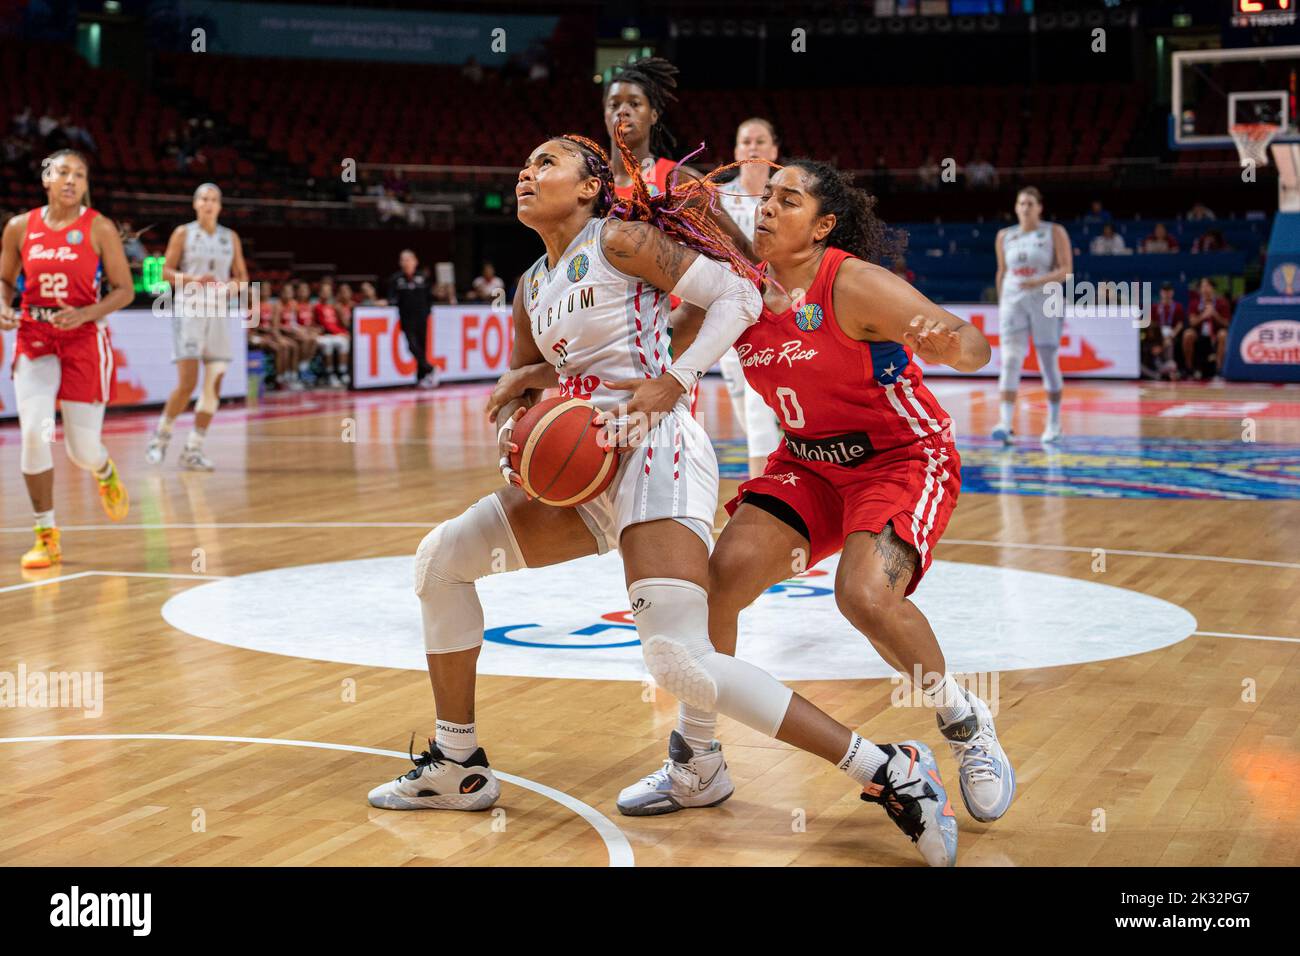 Sydney, Australia. 24th Sep, 2022. Maxuella Lisowa Mbaka (31 Belgium) drives to the basket defended by Jennifer O'Neill (0 Puerto Rico) during the FIBA Womens World Cup 2022 game between Puerto Rico and Belgium at the Sydney Superdome in Sydney, Australia. (Foto: Noe Llamas/Sports Press Photo/C - ONE HOUR DEADLINE - ONLY ACTIVATE FTP IF IMAGES LESS THAN ONE HOUR OLD - Alamy) Credit: SPP Sport Press Photo. /Alamy Live News Stock Photo